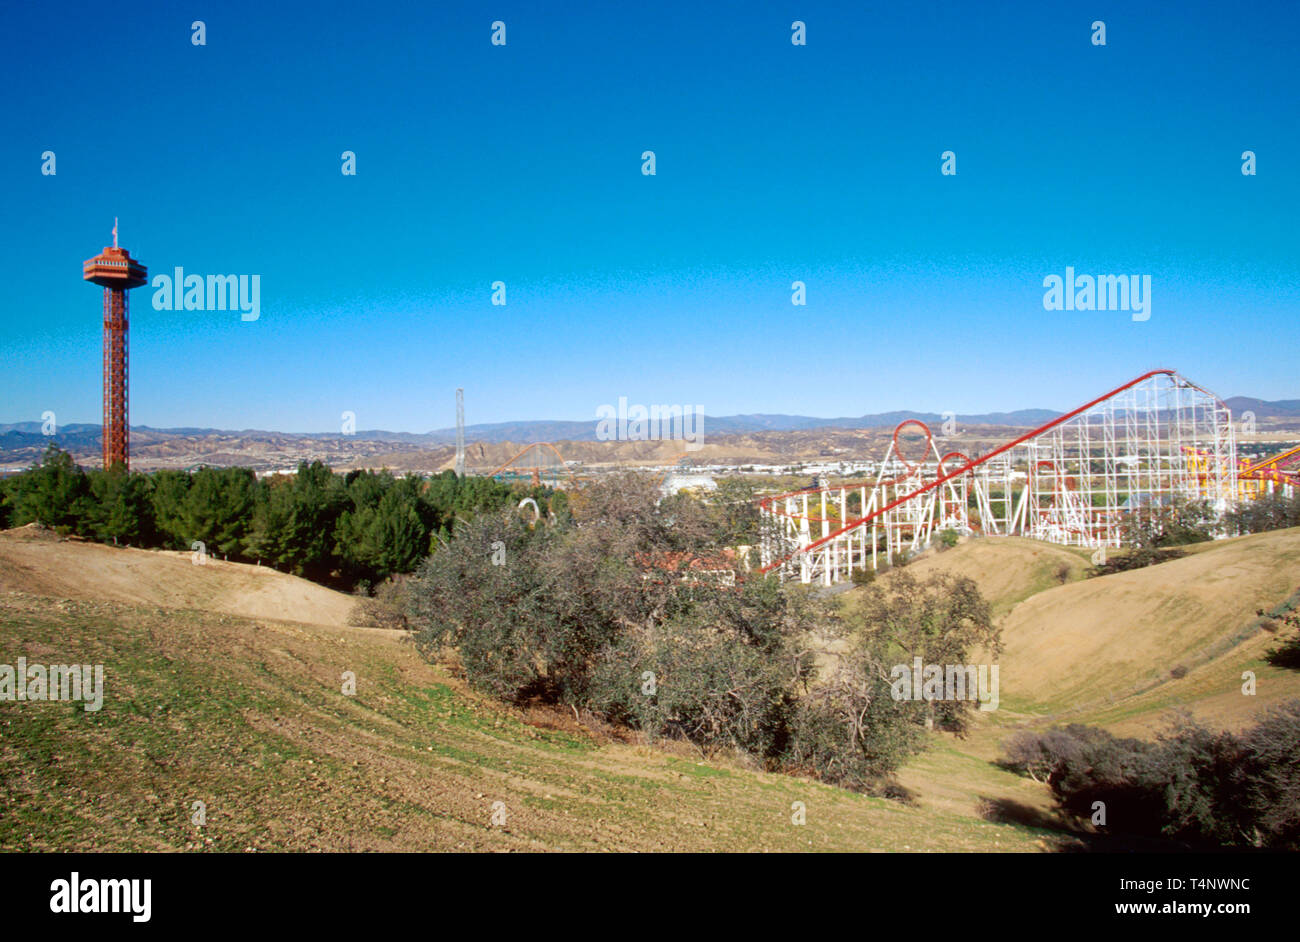 Santa Clarita California,Six Flags Magic Mountain theme park,largest concentration of roller coasters in,visitors travel traveling tour tourist touris Stock Photo